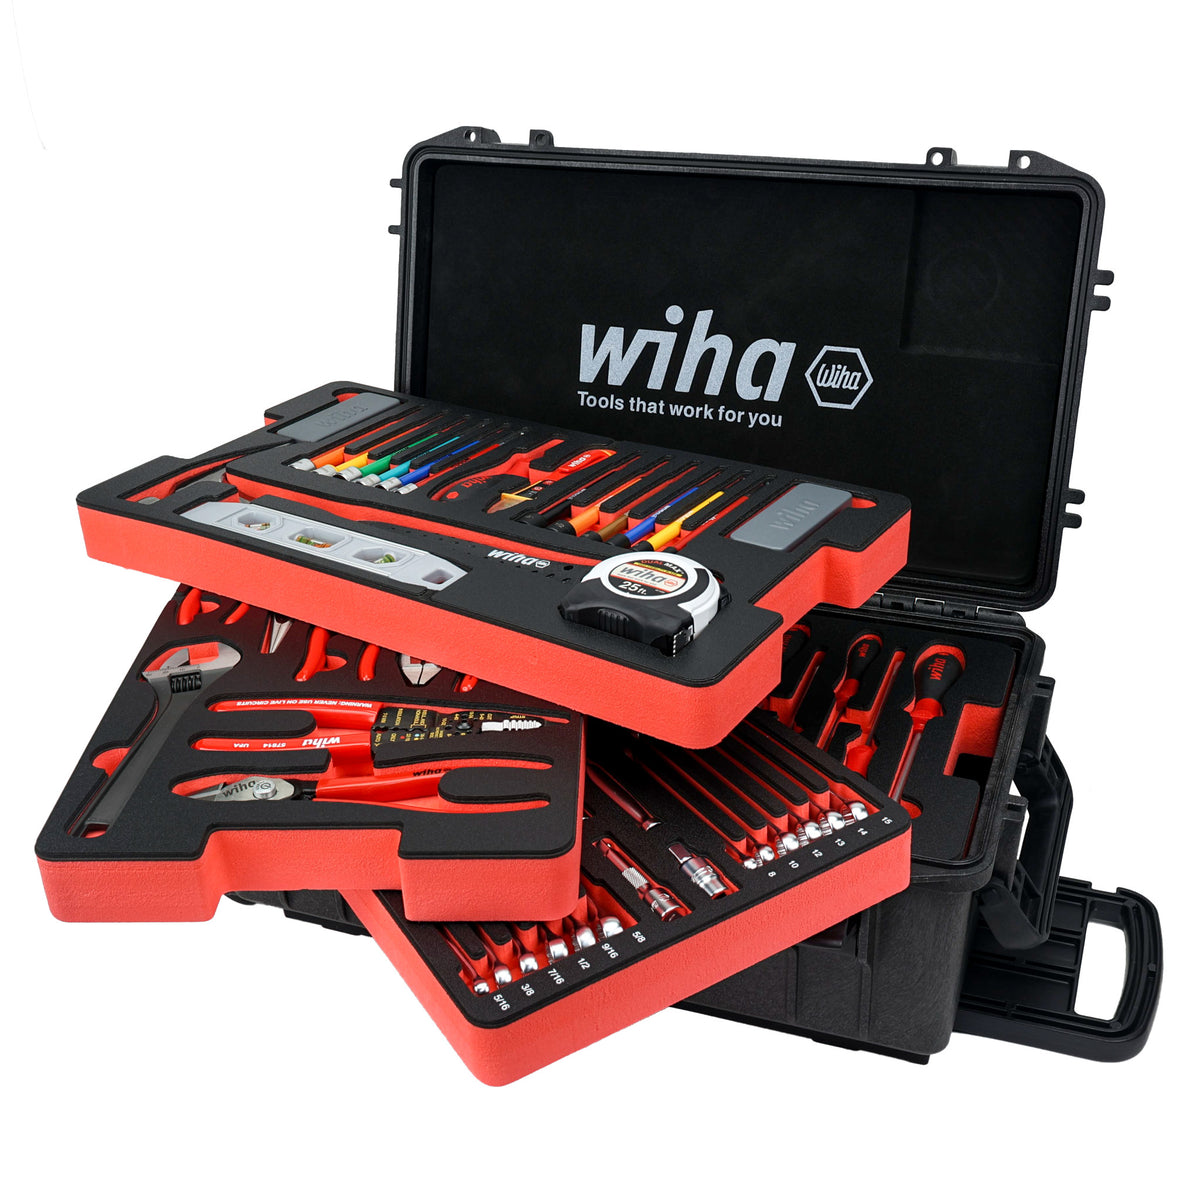 Wiha promises revolutionary hand tool invention and exciting innovations at  Light+Building 2018, Press and News